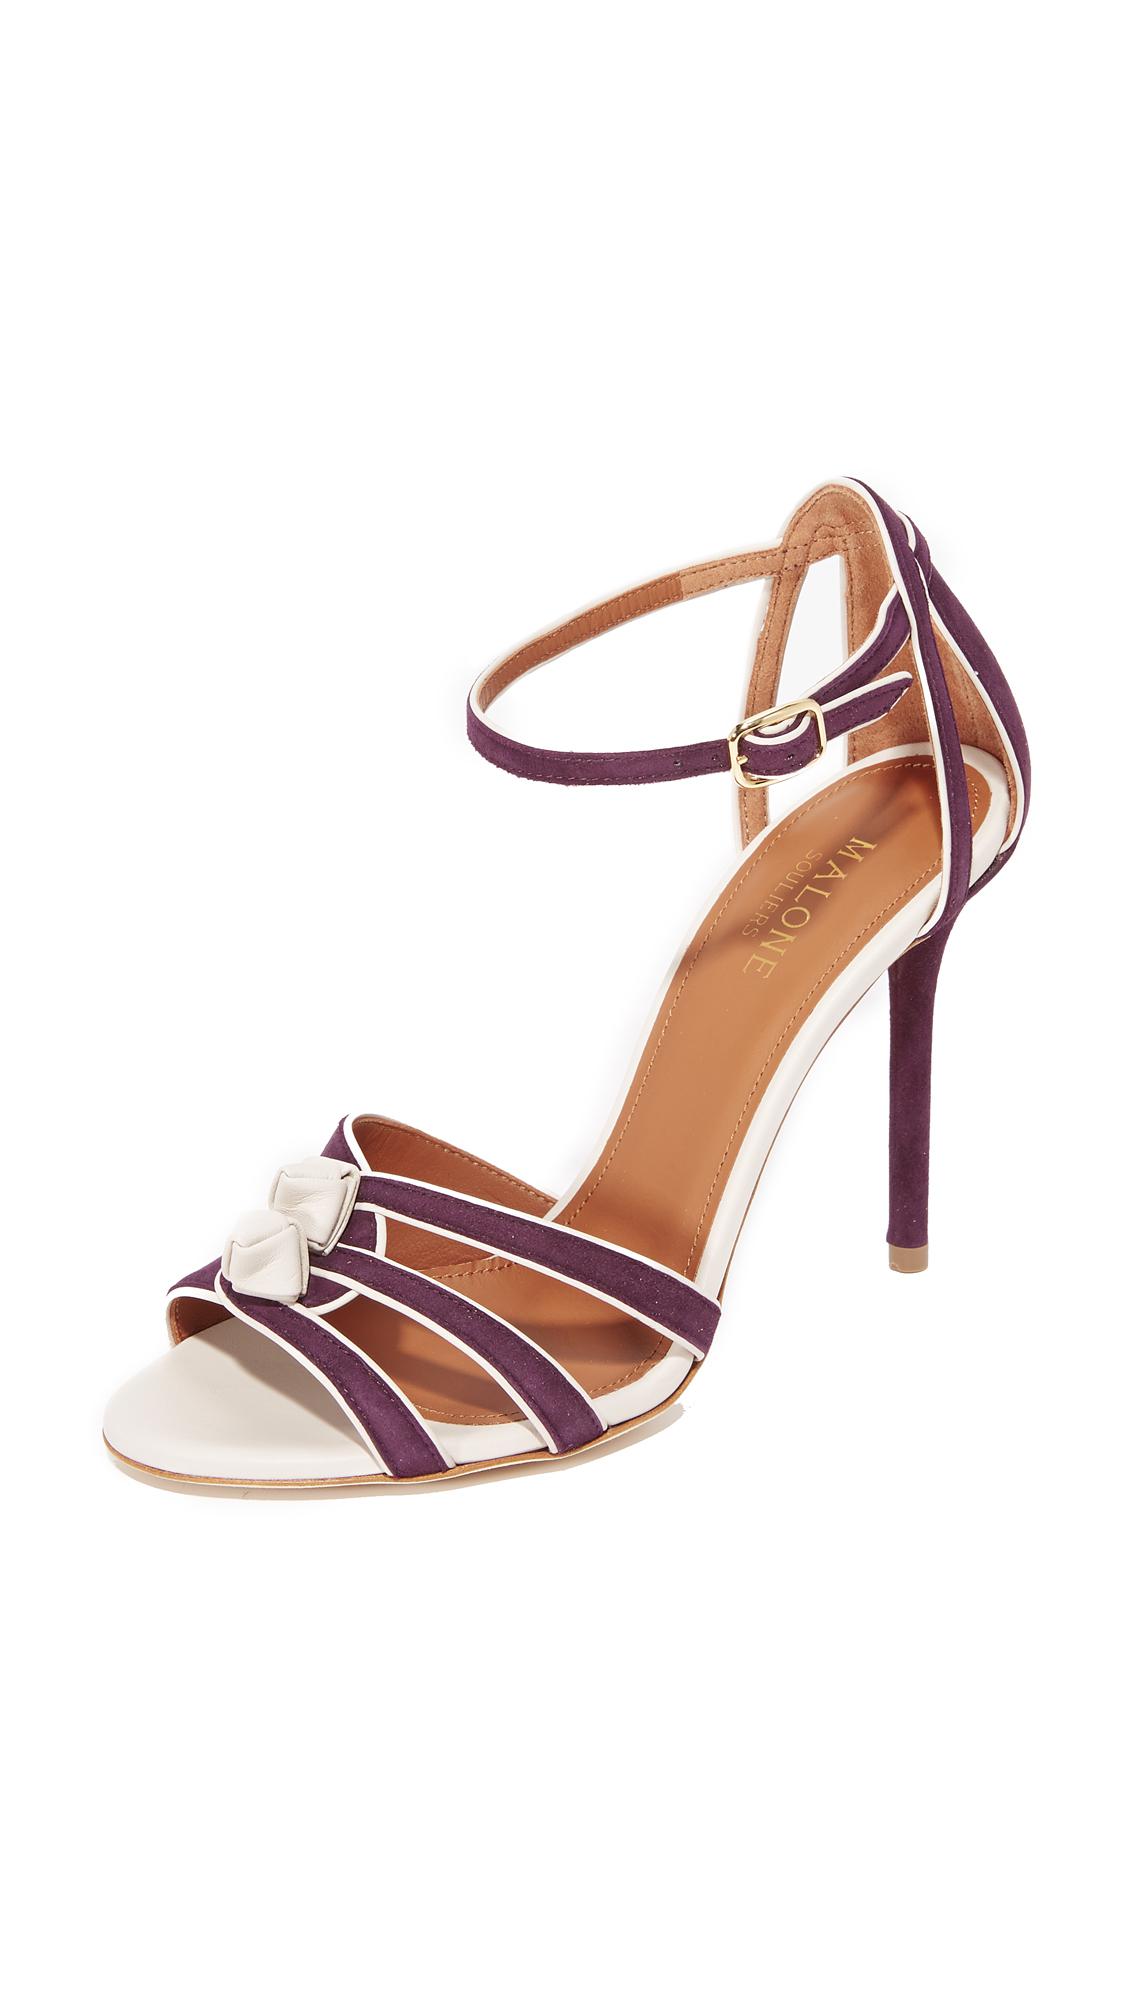 Lyst - Malone Souliers Eunice Sandals